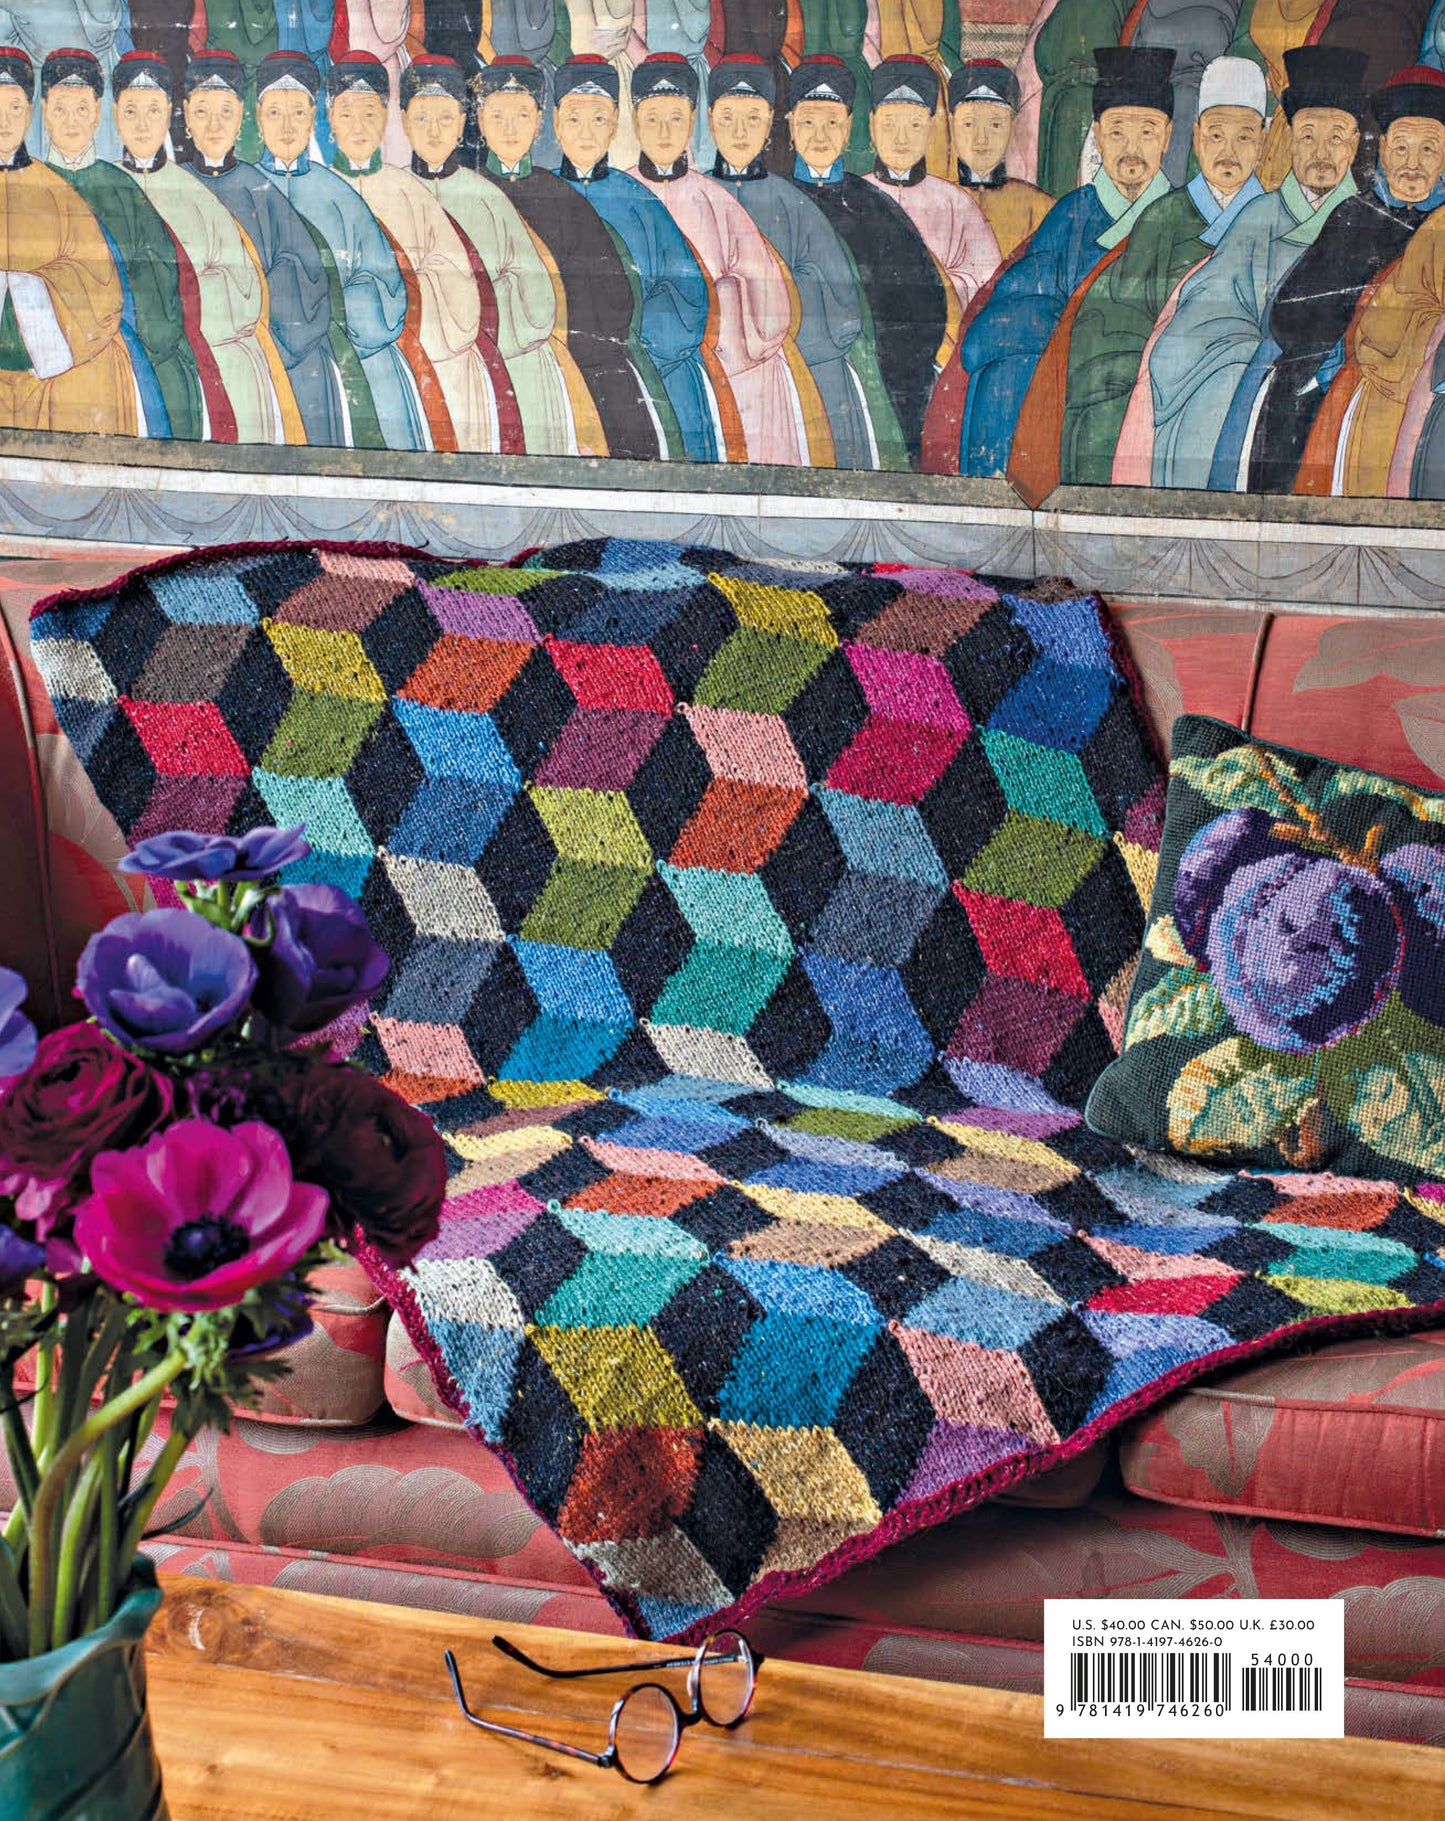 KAFFE FASSETT IN THE STUDIO: Behind the Scenes with a Master Colorist